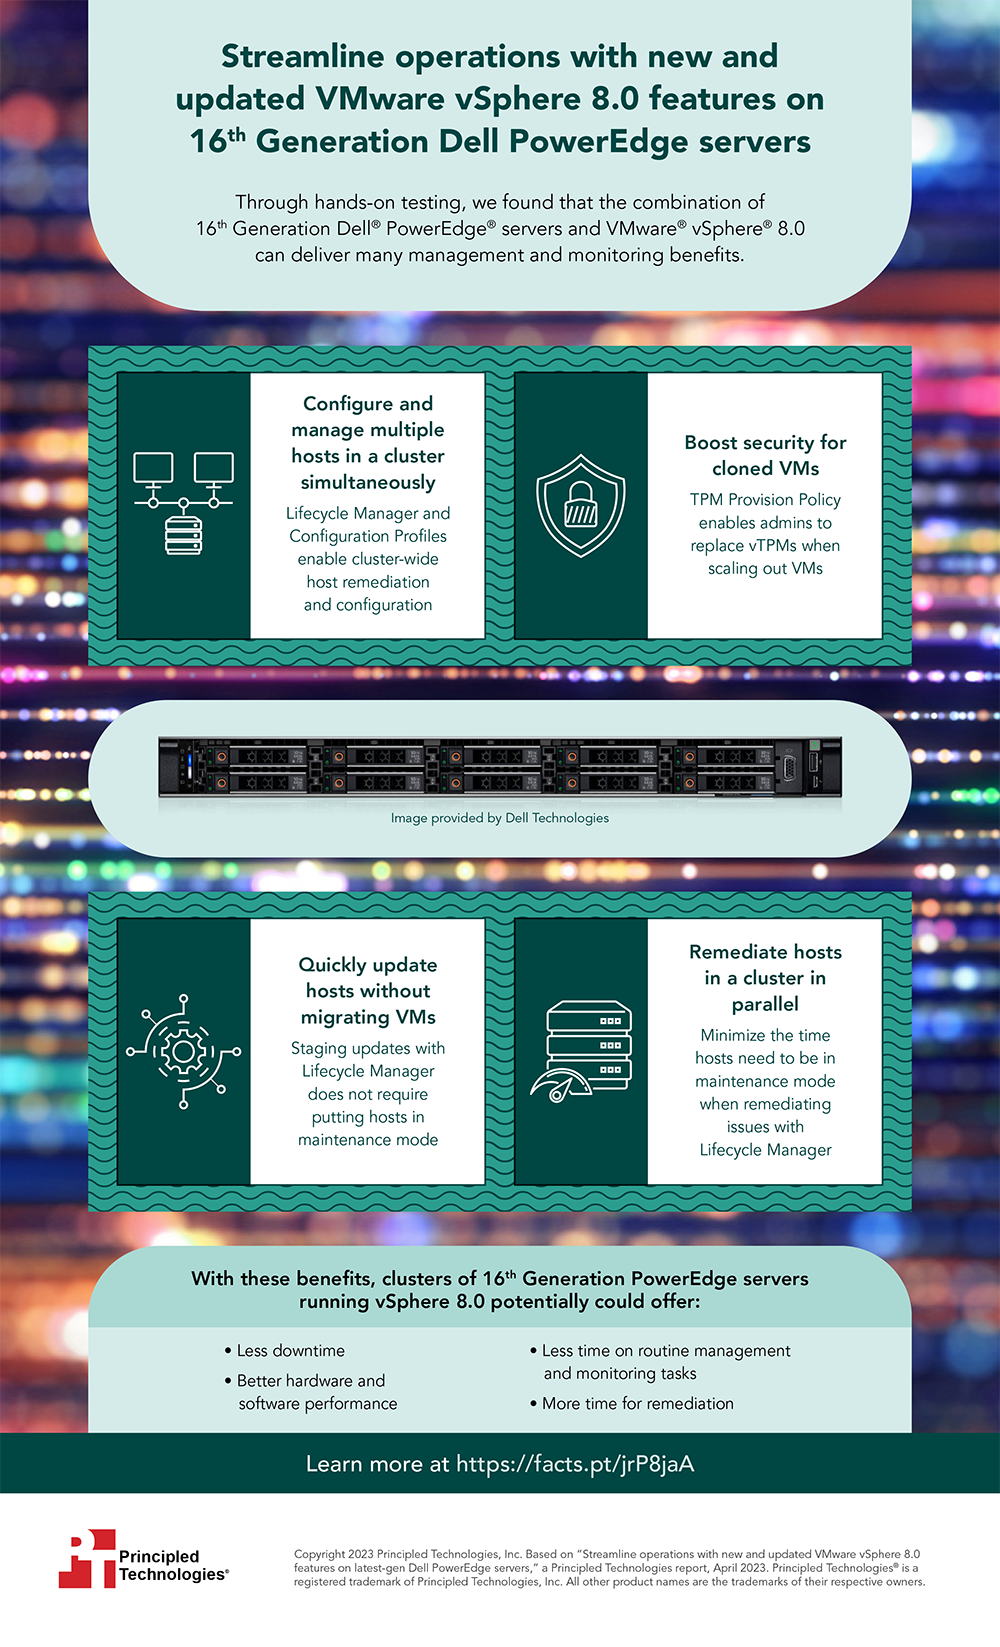  Streamline operations with new and updated VMware vSphere 8.0 features on 16th Generation Dell PowerEdge servers - Infographic